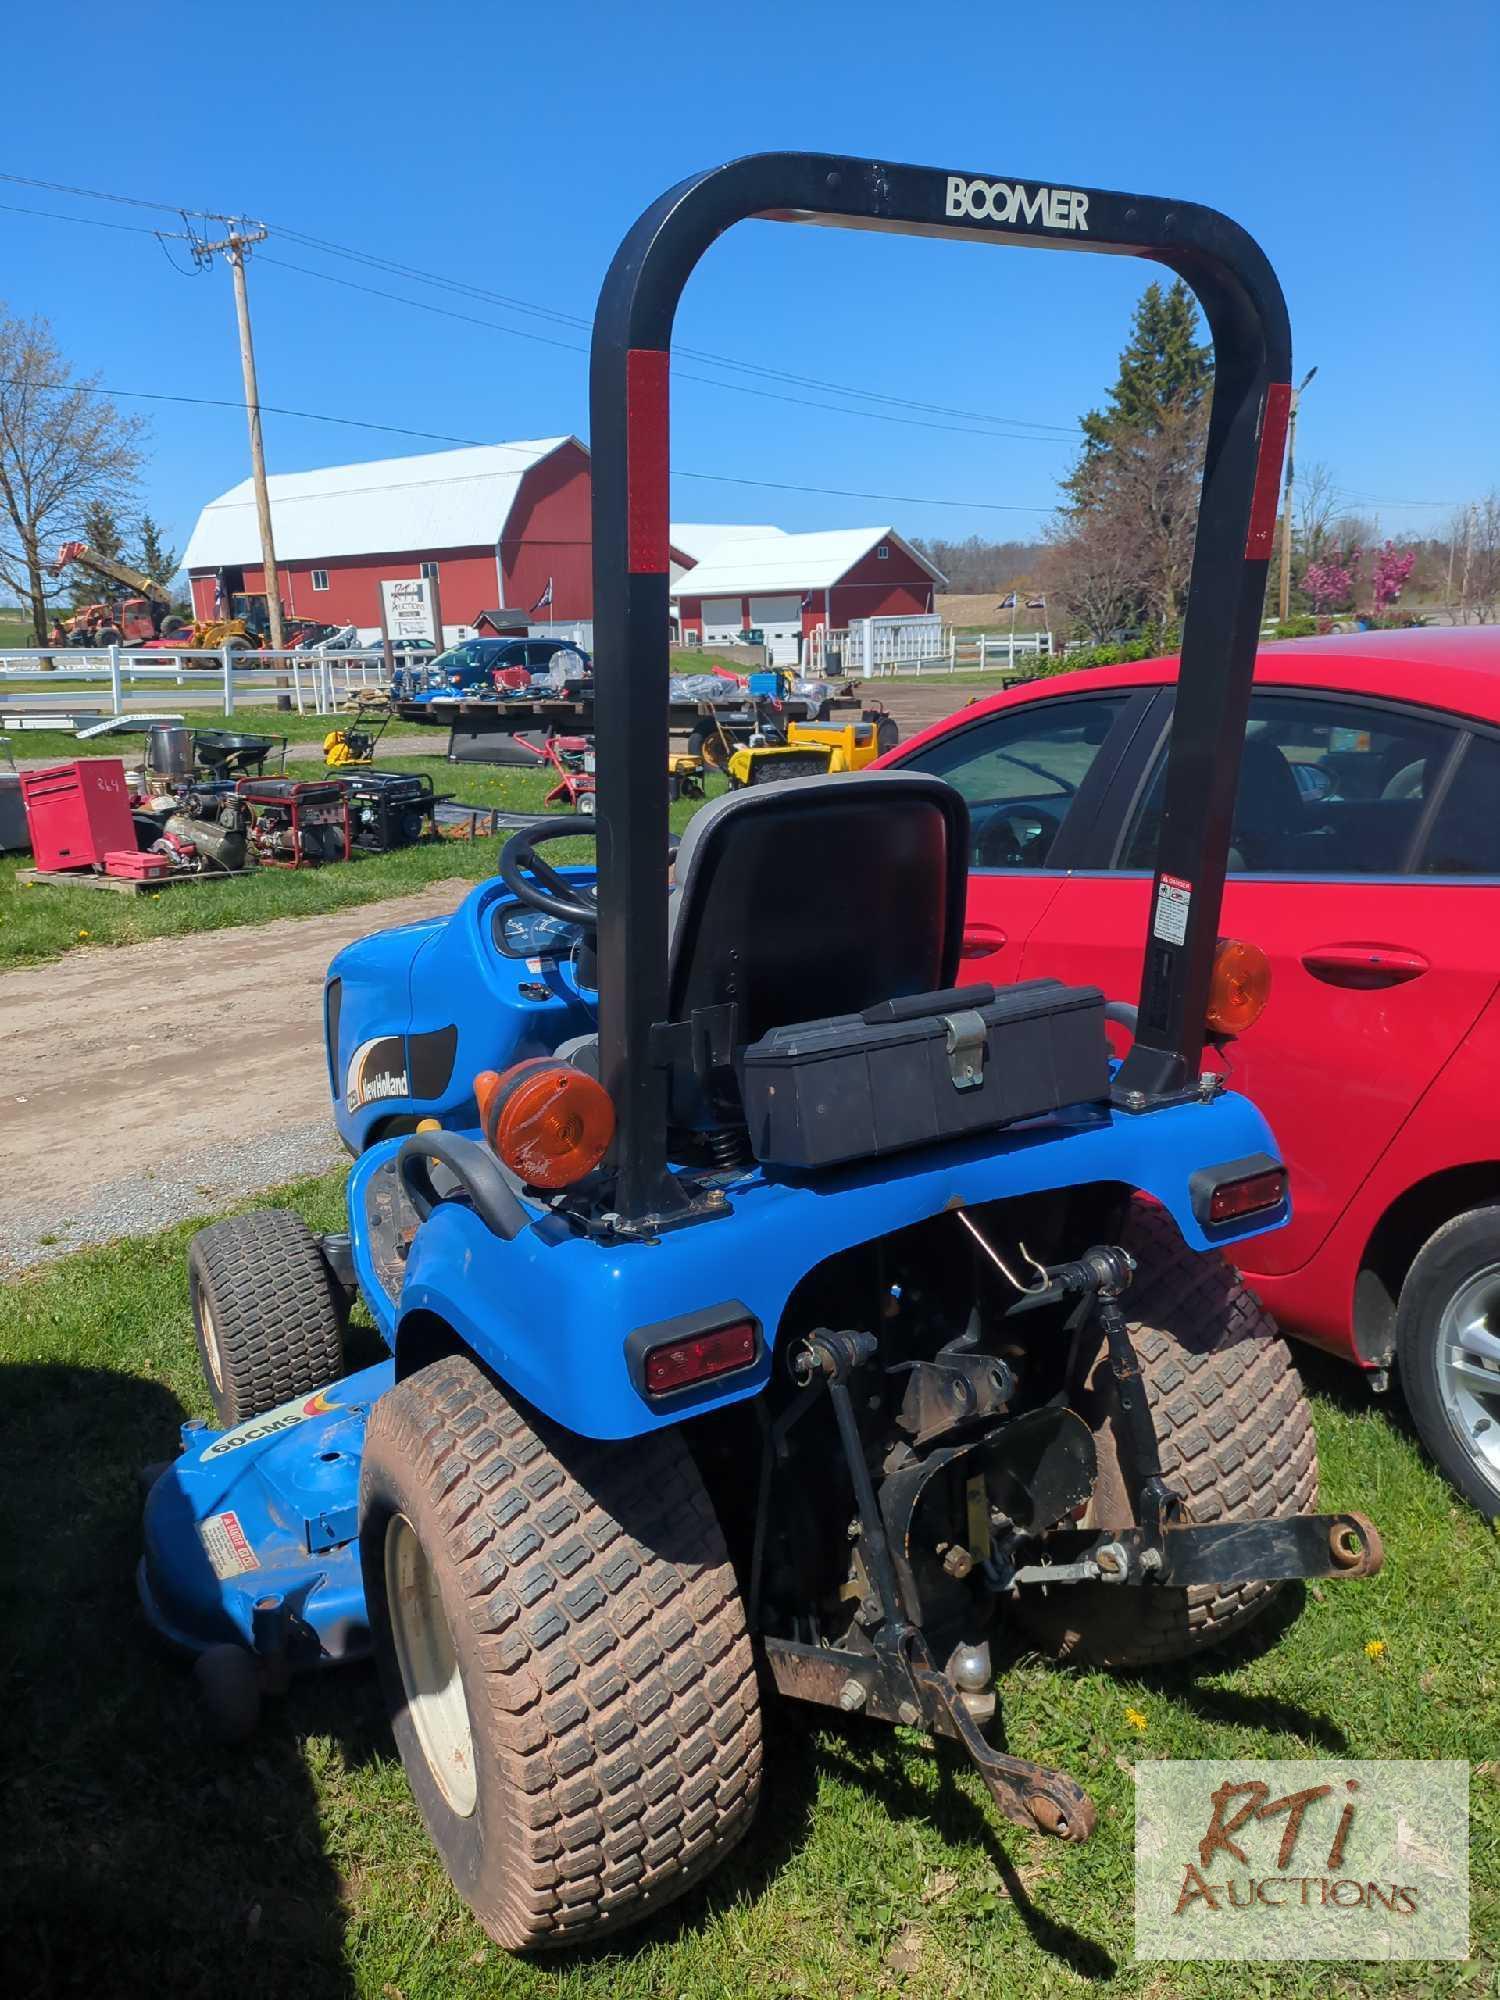 New Holland TZ25DA compact tractor, 60in belly mower, lift arms, PTO, HST, high/low range, 4WD, 210